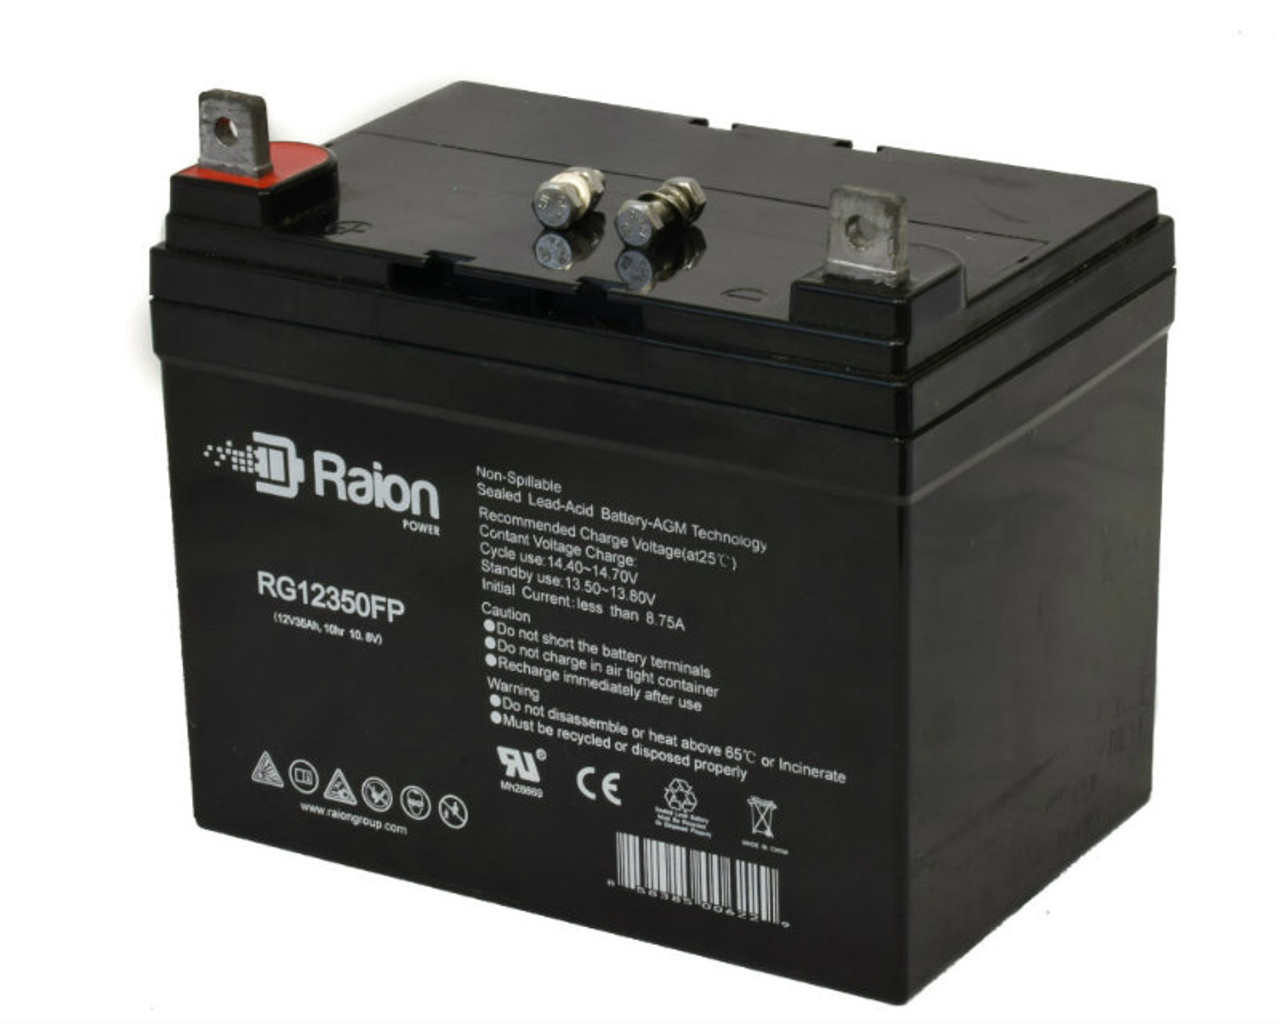 Raion Power Replacement 12V 35Ah RG12350FP Mobility Scooter Battery for Pillar Technology Blazer Plus